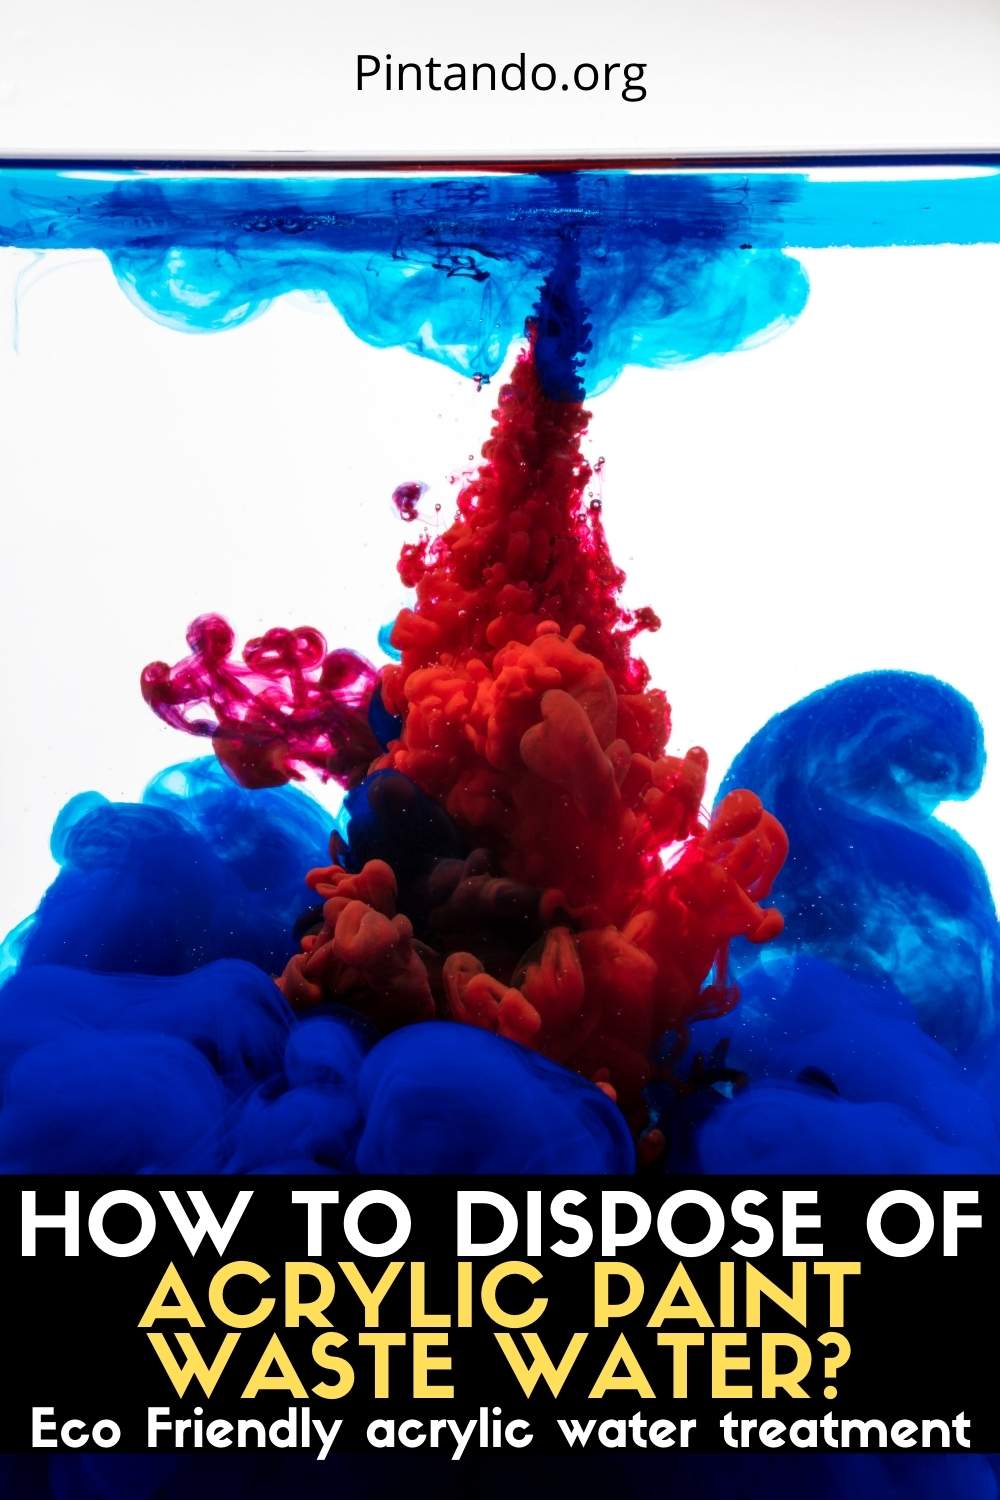 How to Dispose of Acrylic Paint Waste Water